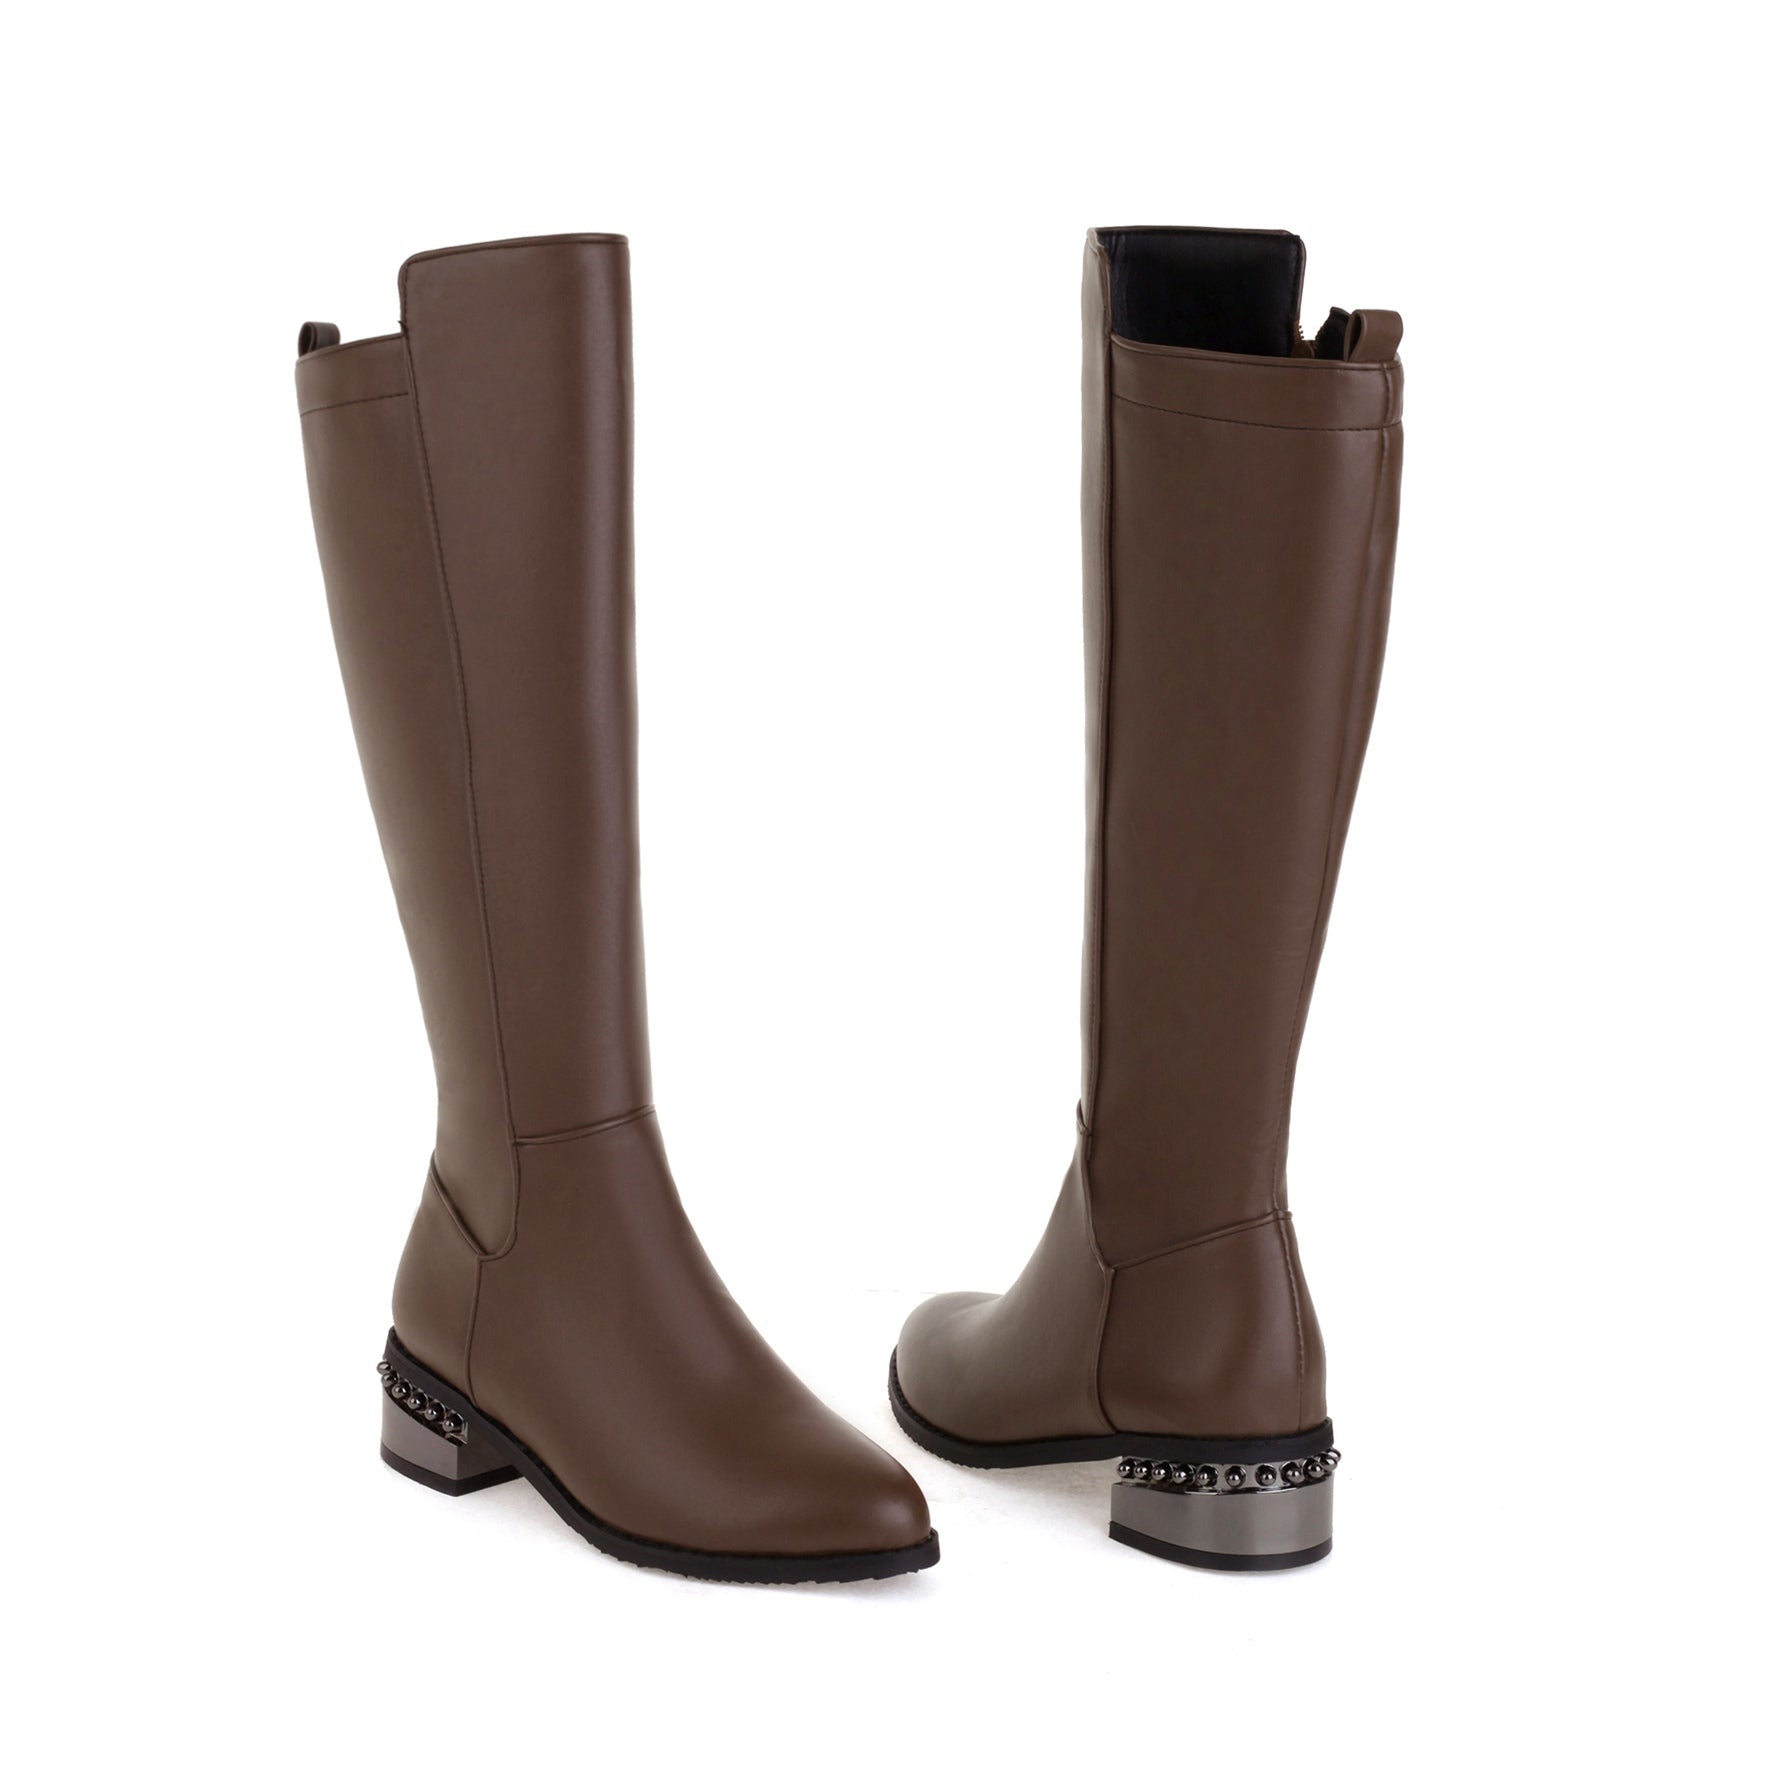 Bigsizeheels Simple solid color round toe over-the-knee boots-Dark brown freeshipping - bigsizeheel®-size5-size15 -All Plus Sizes Available!